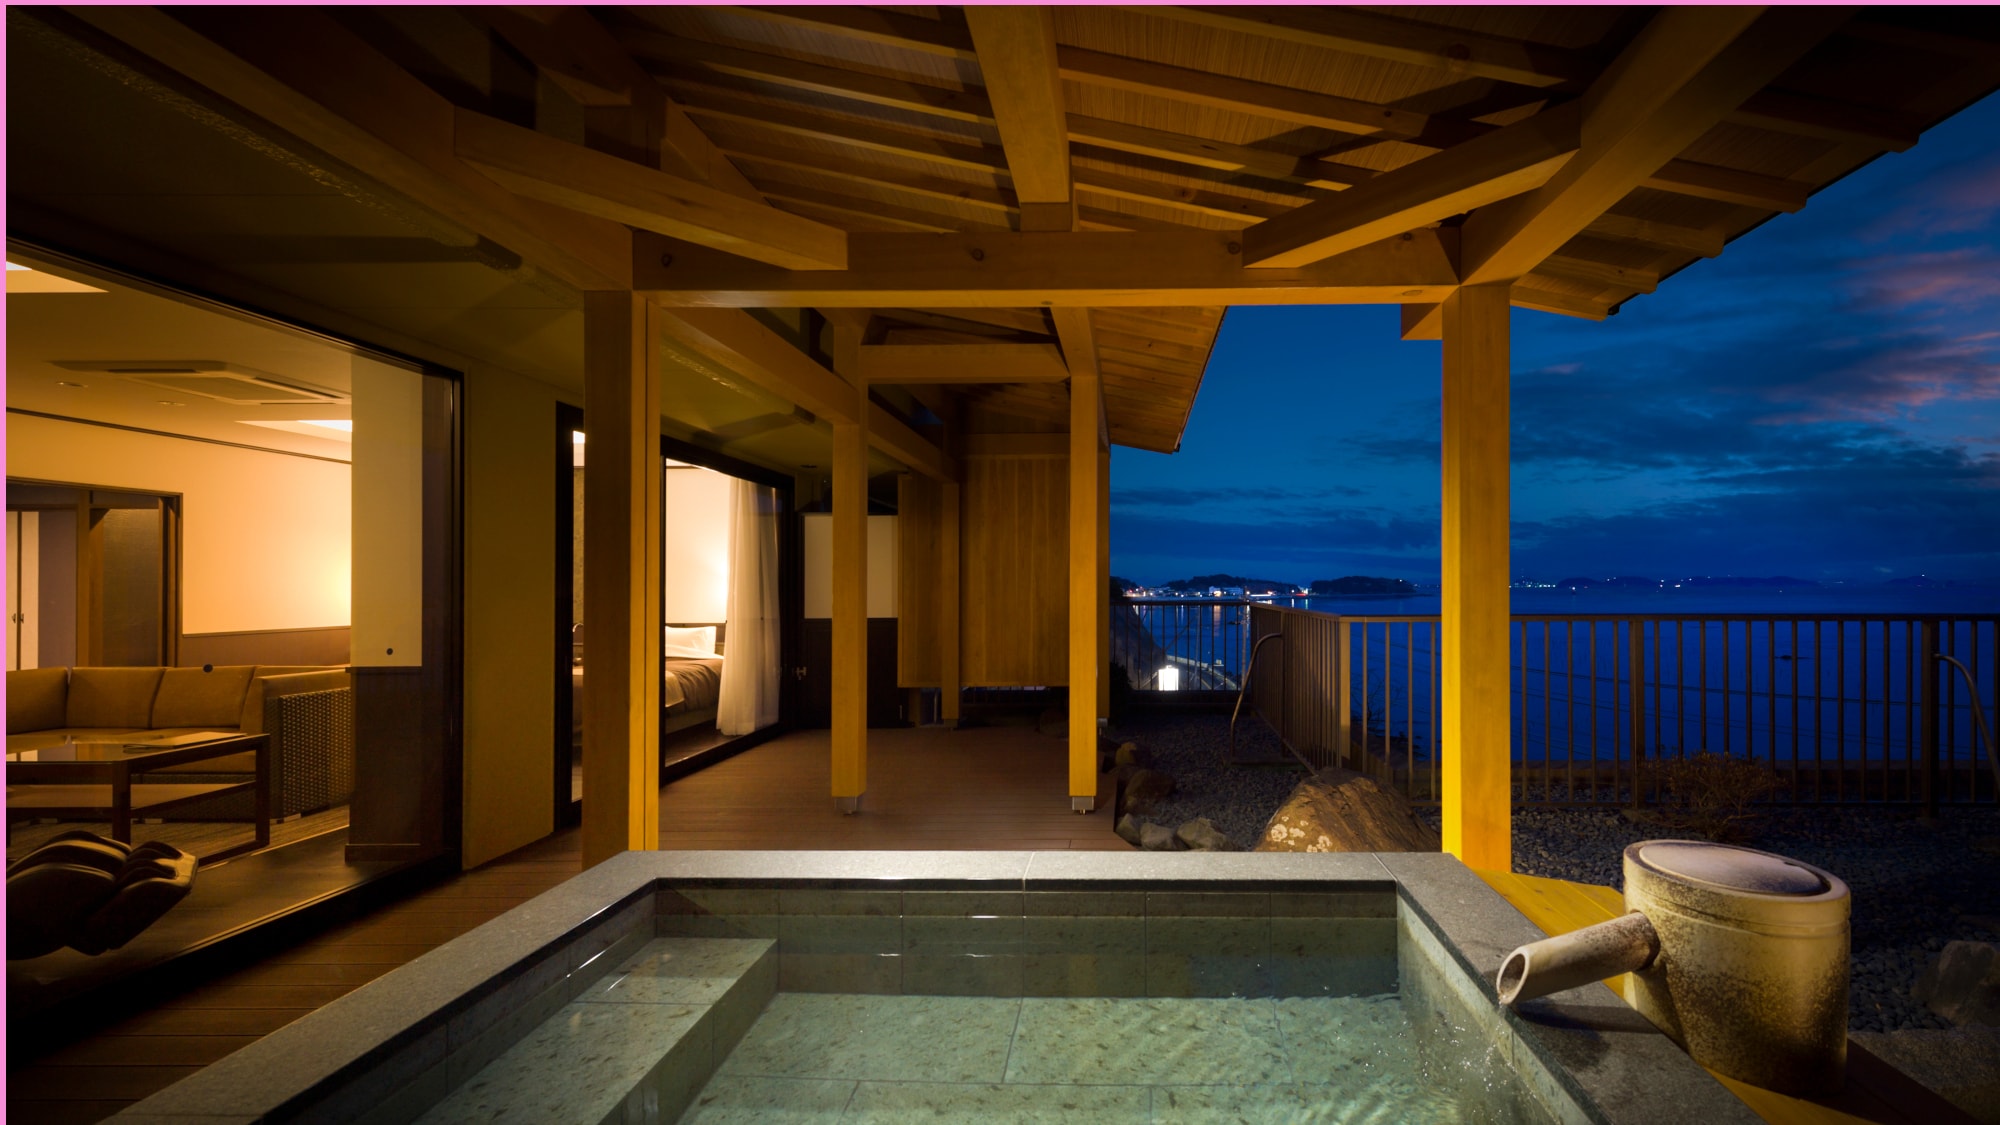 [Furari] Japanese-Western style room with open-air bath, an example of a guest room open-air bath